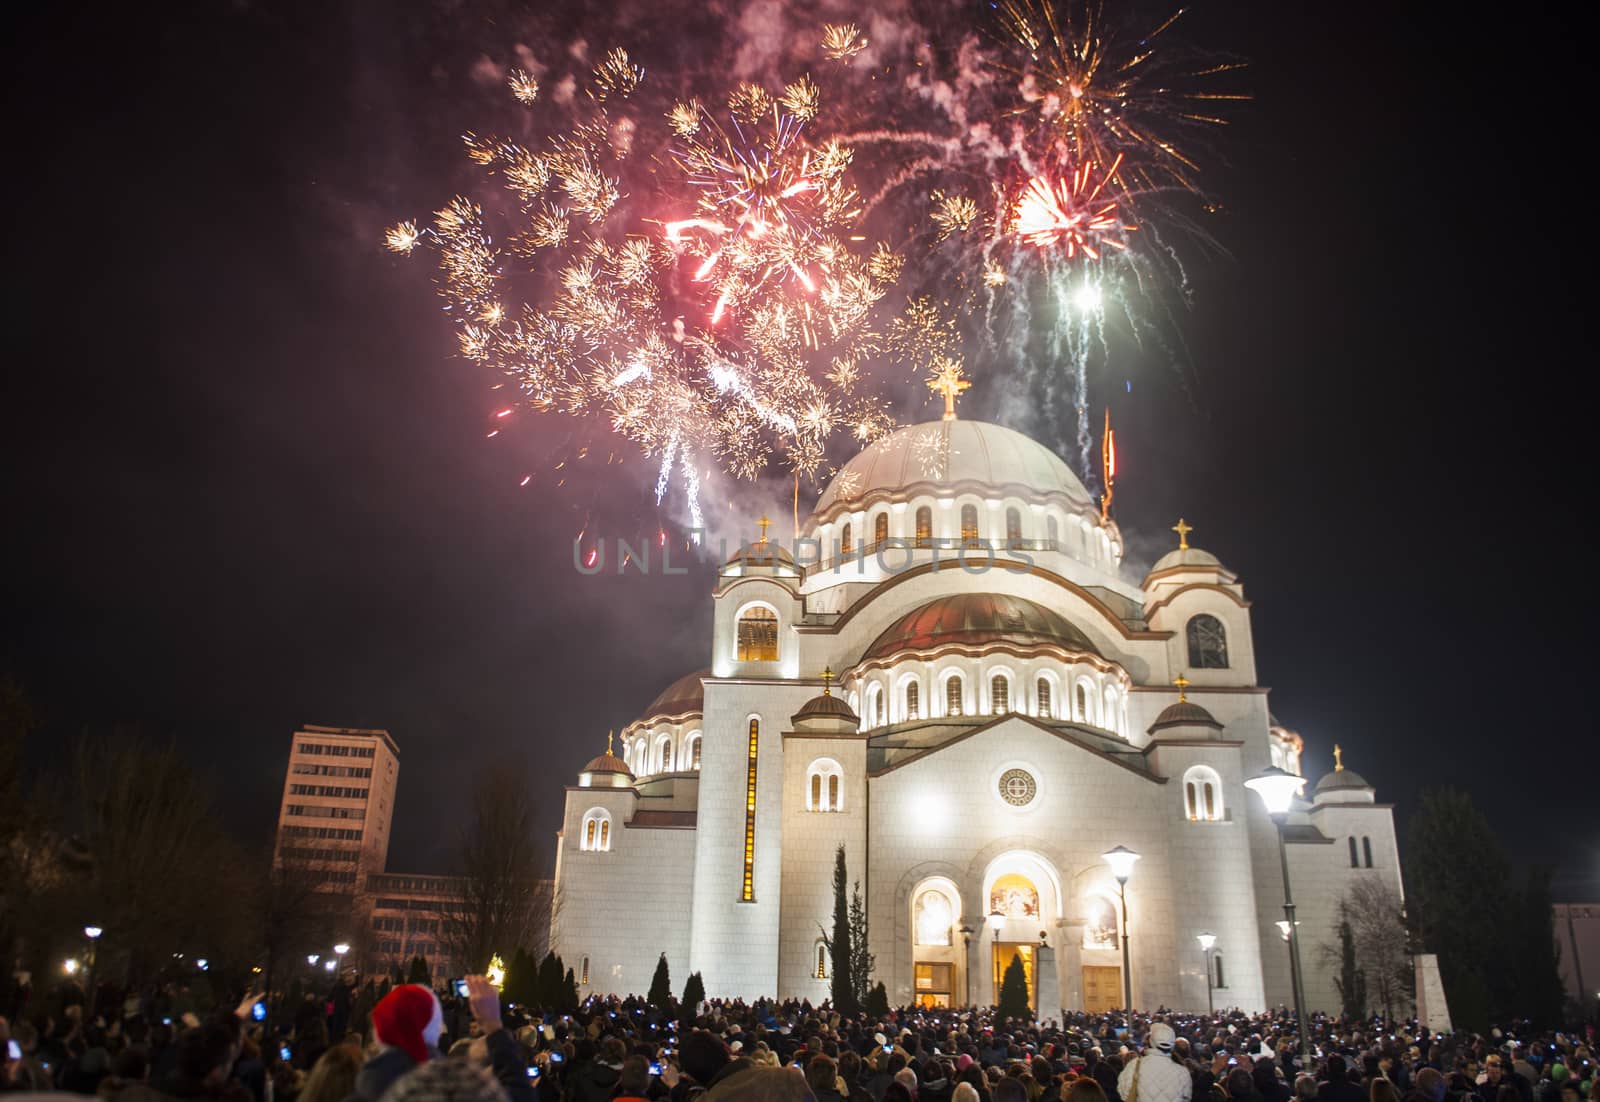 BELGRADE - JANUARY 13: Serbian New years eve celebration in front of the St. Sava's temple with fireworks at midnight in Belgrade, Serbia on January 13, 2014